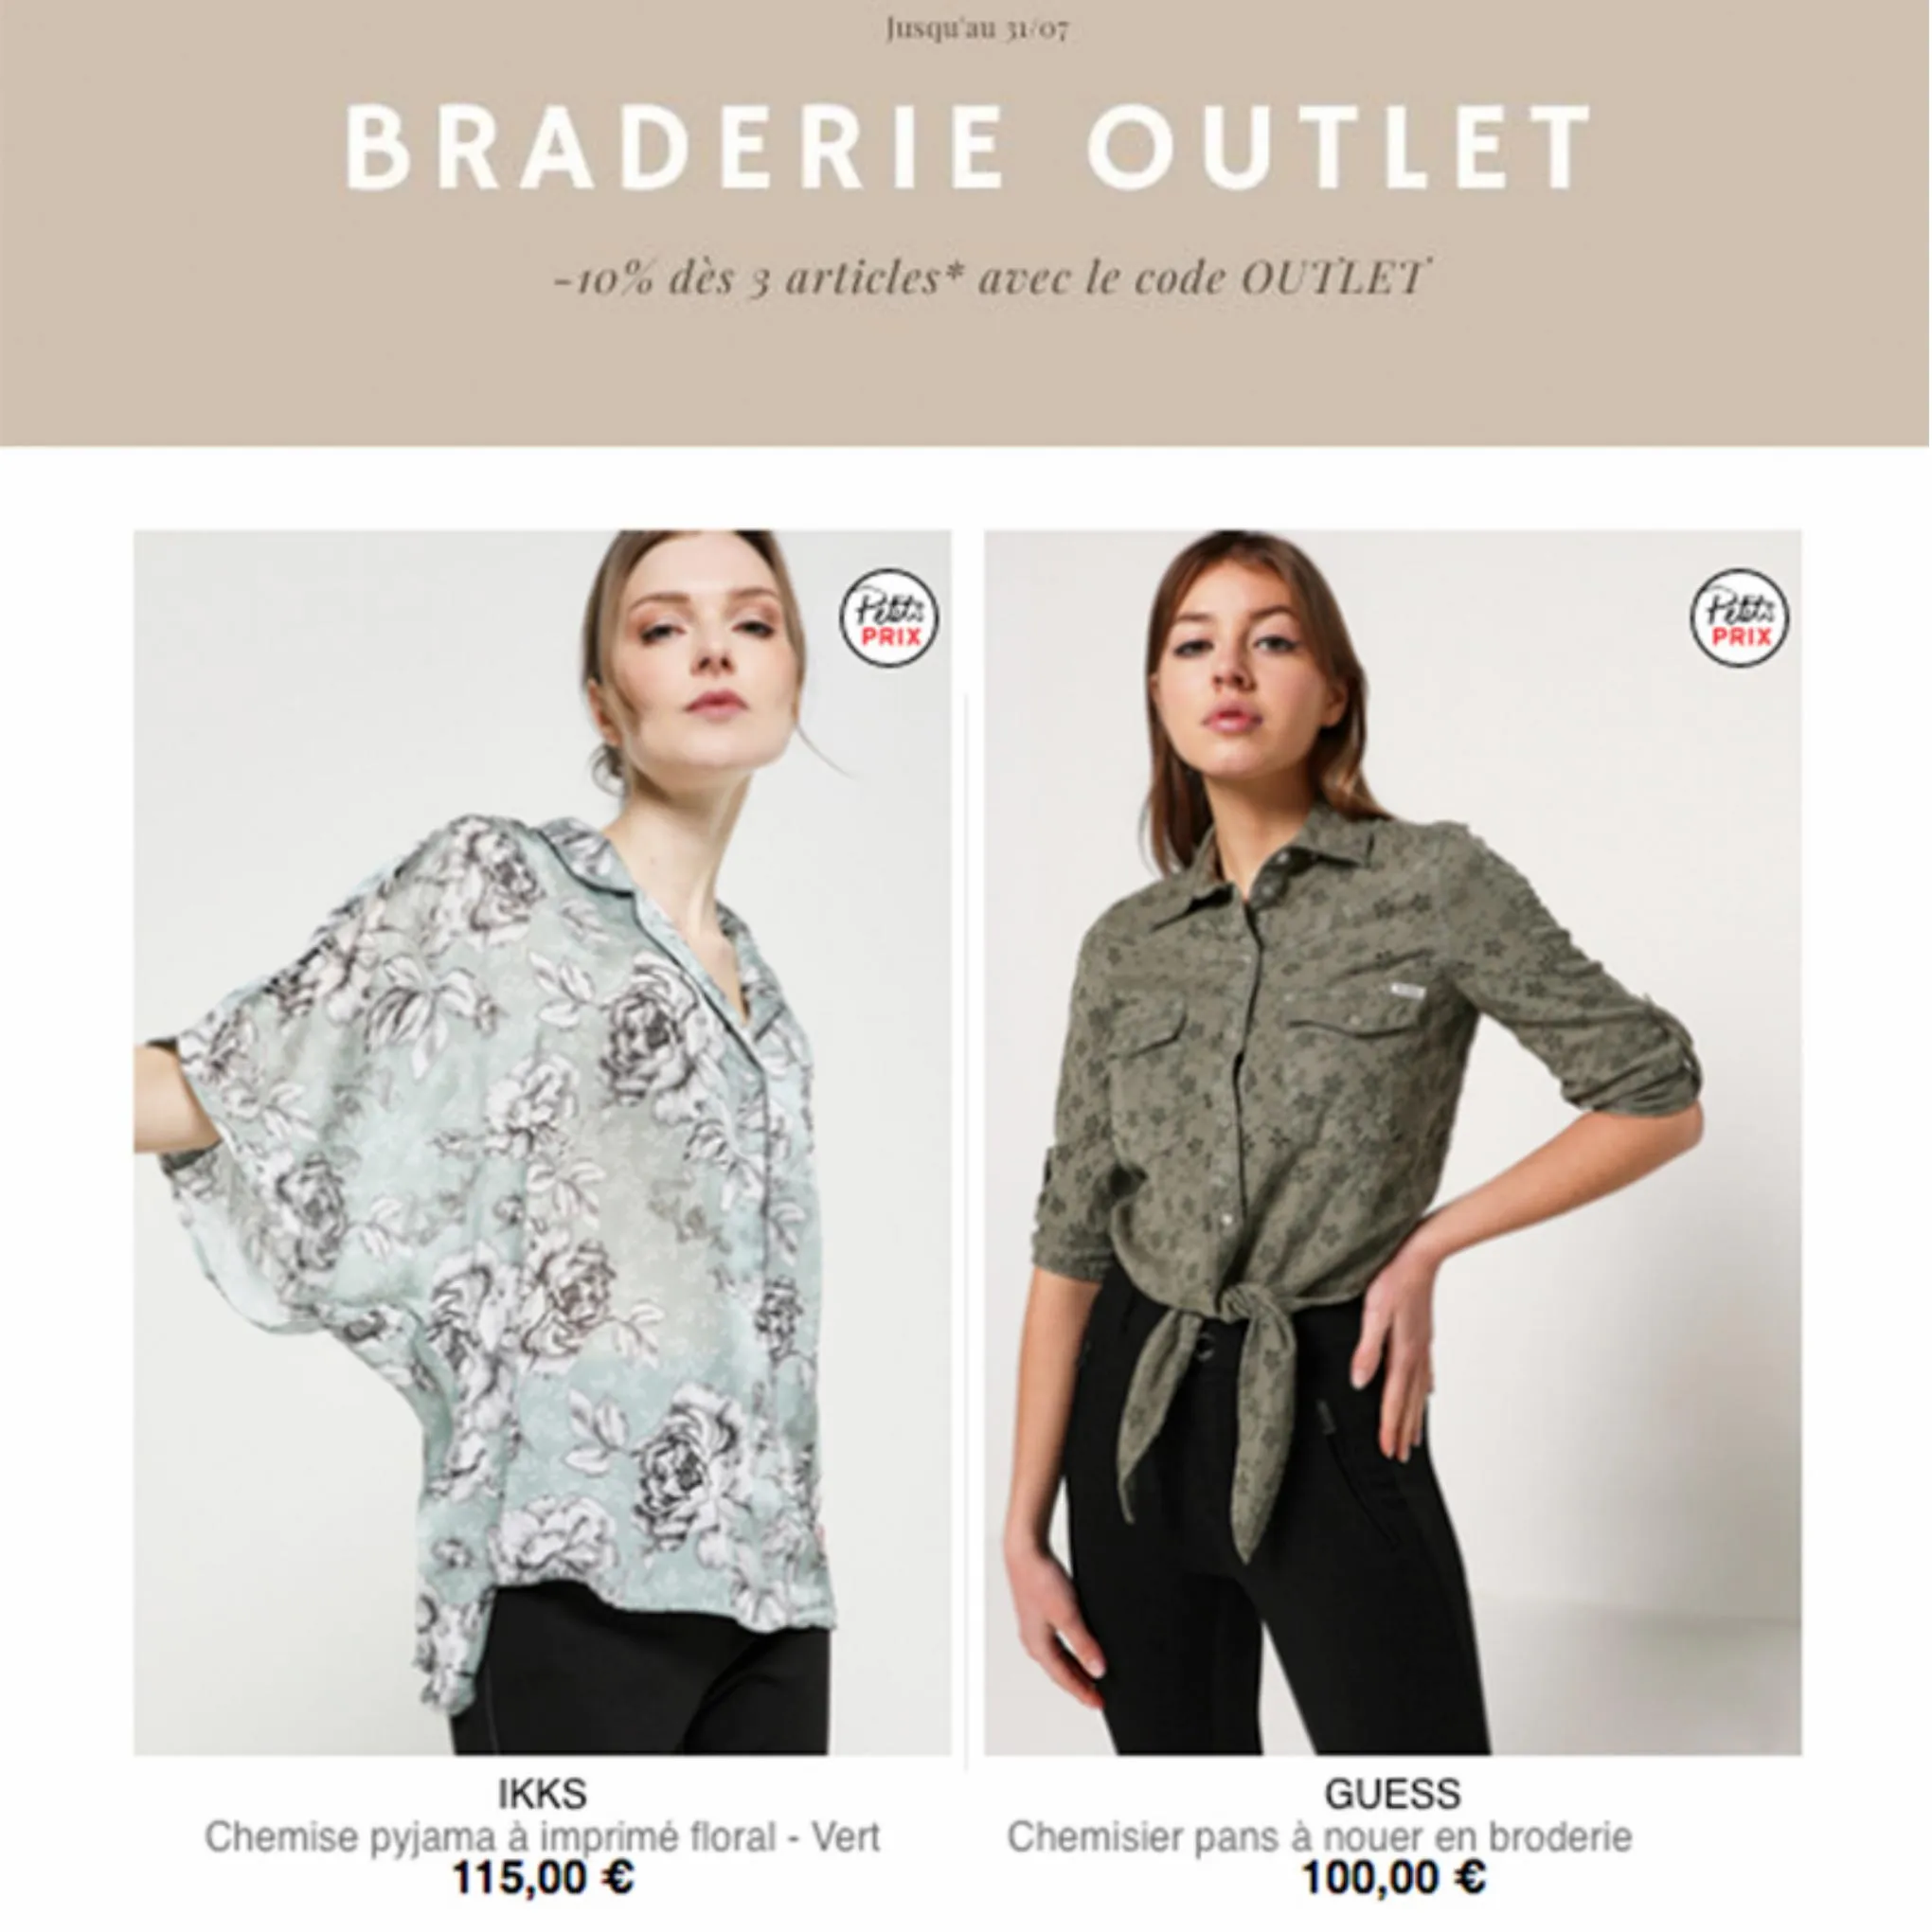 Catalogue Braderie Outlet, page 00003